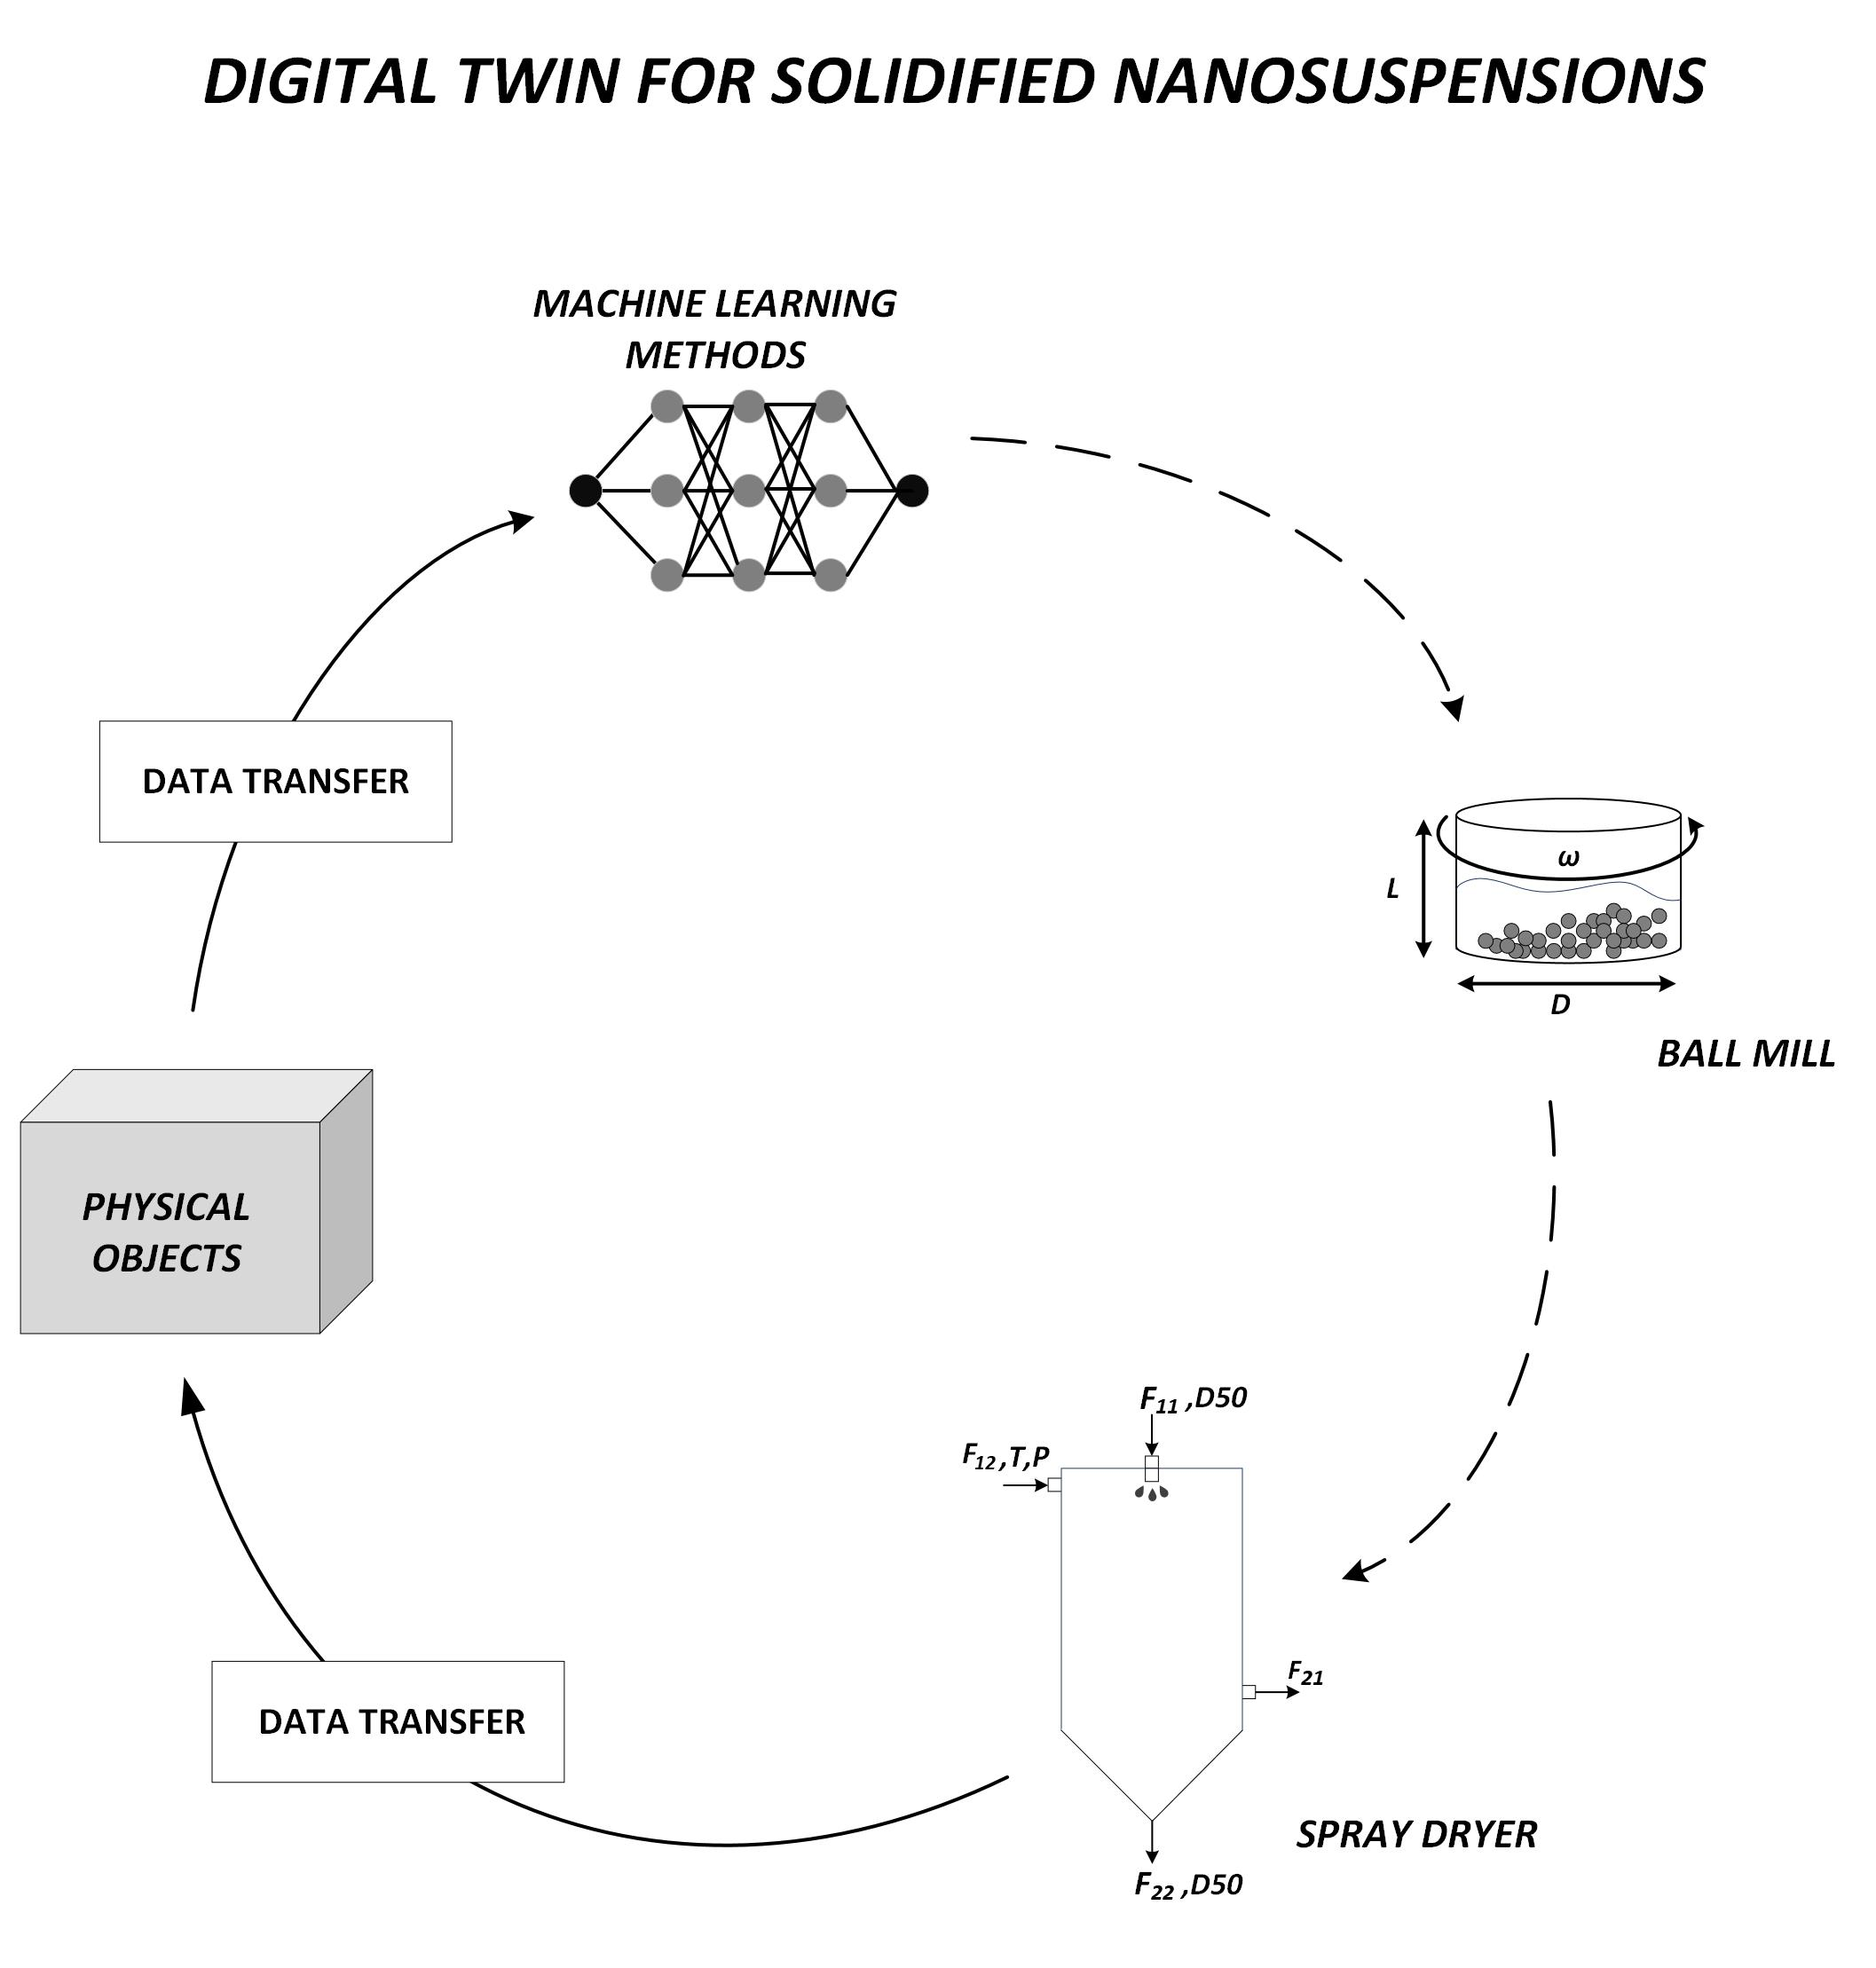 Pharma 4.0-Artificially Intelligent Digital Twins for Solidified Nanosuspensions